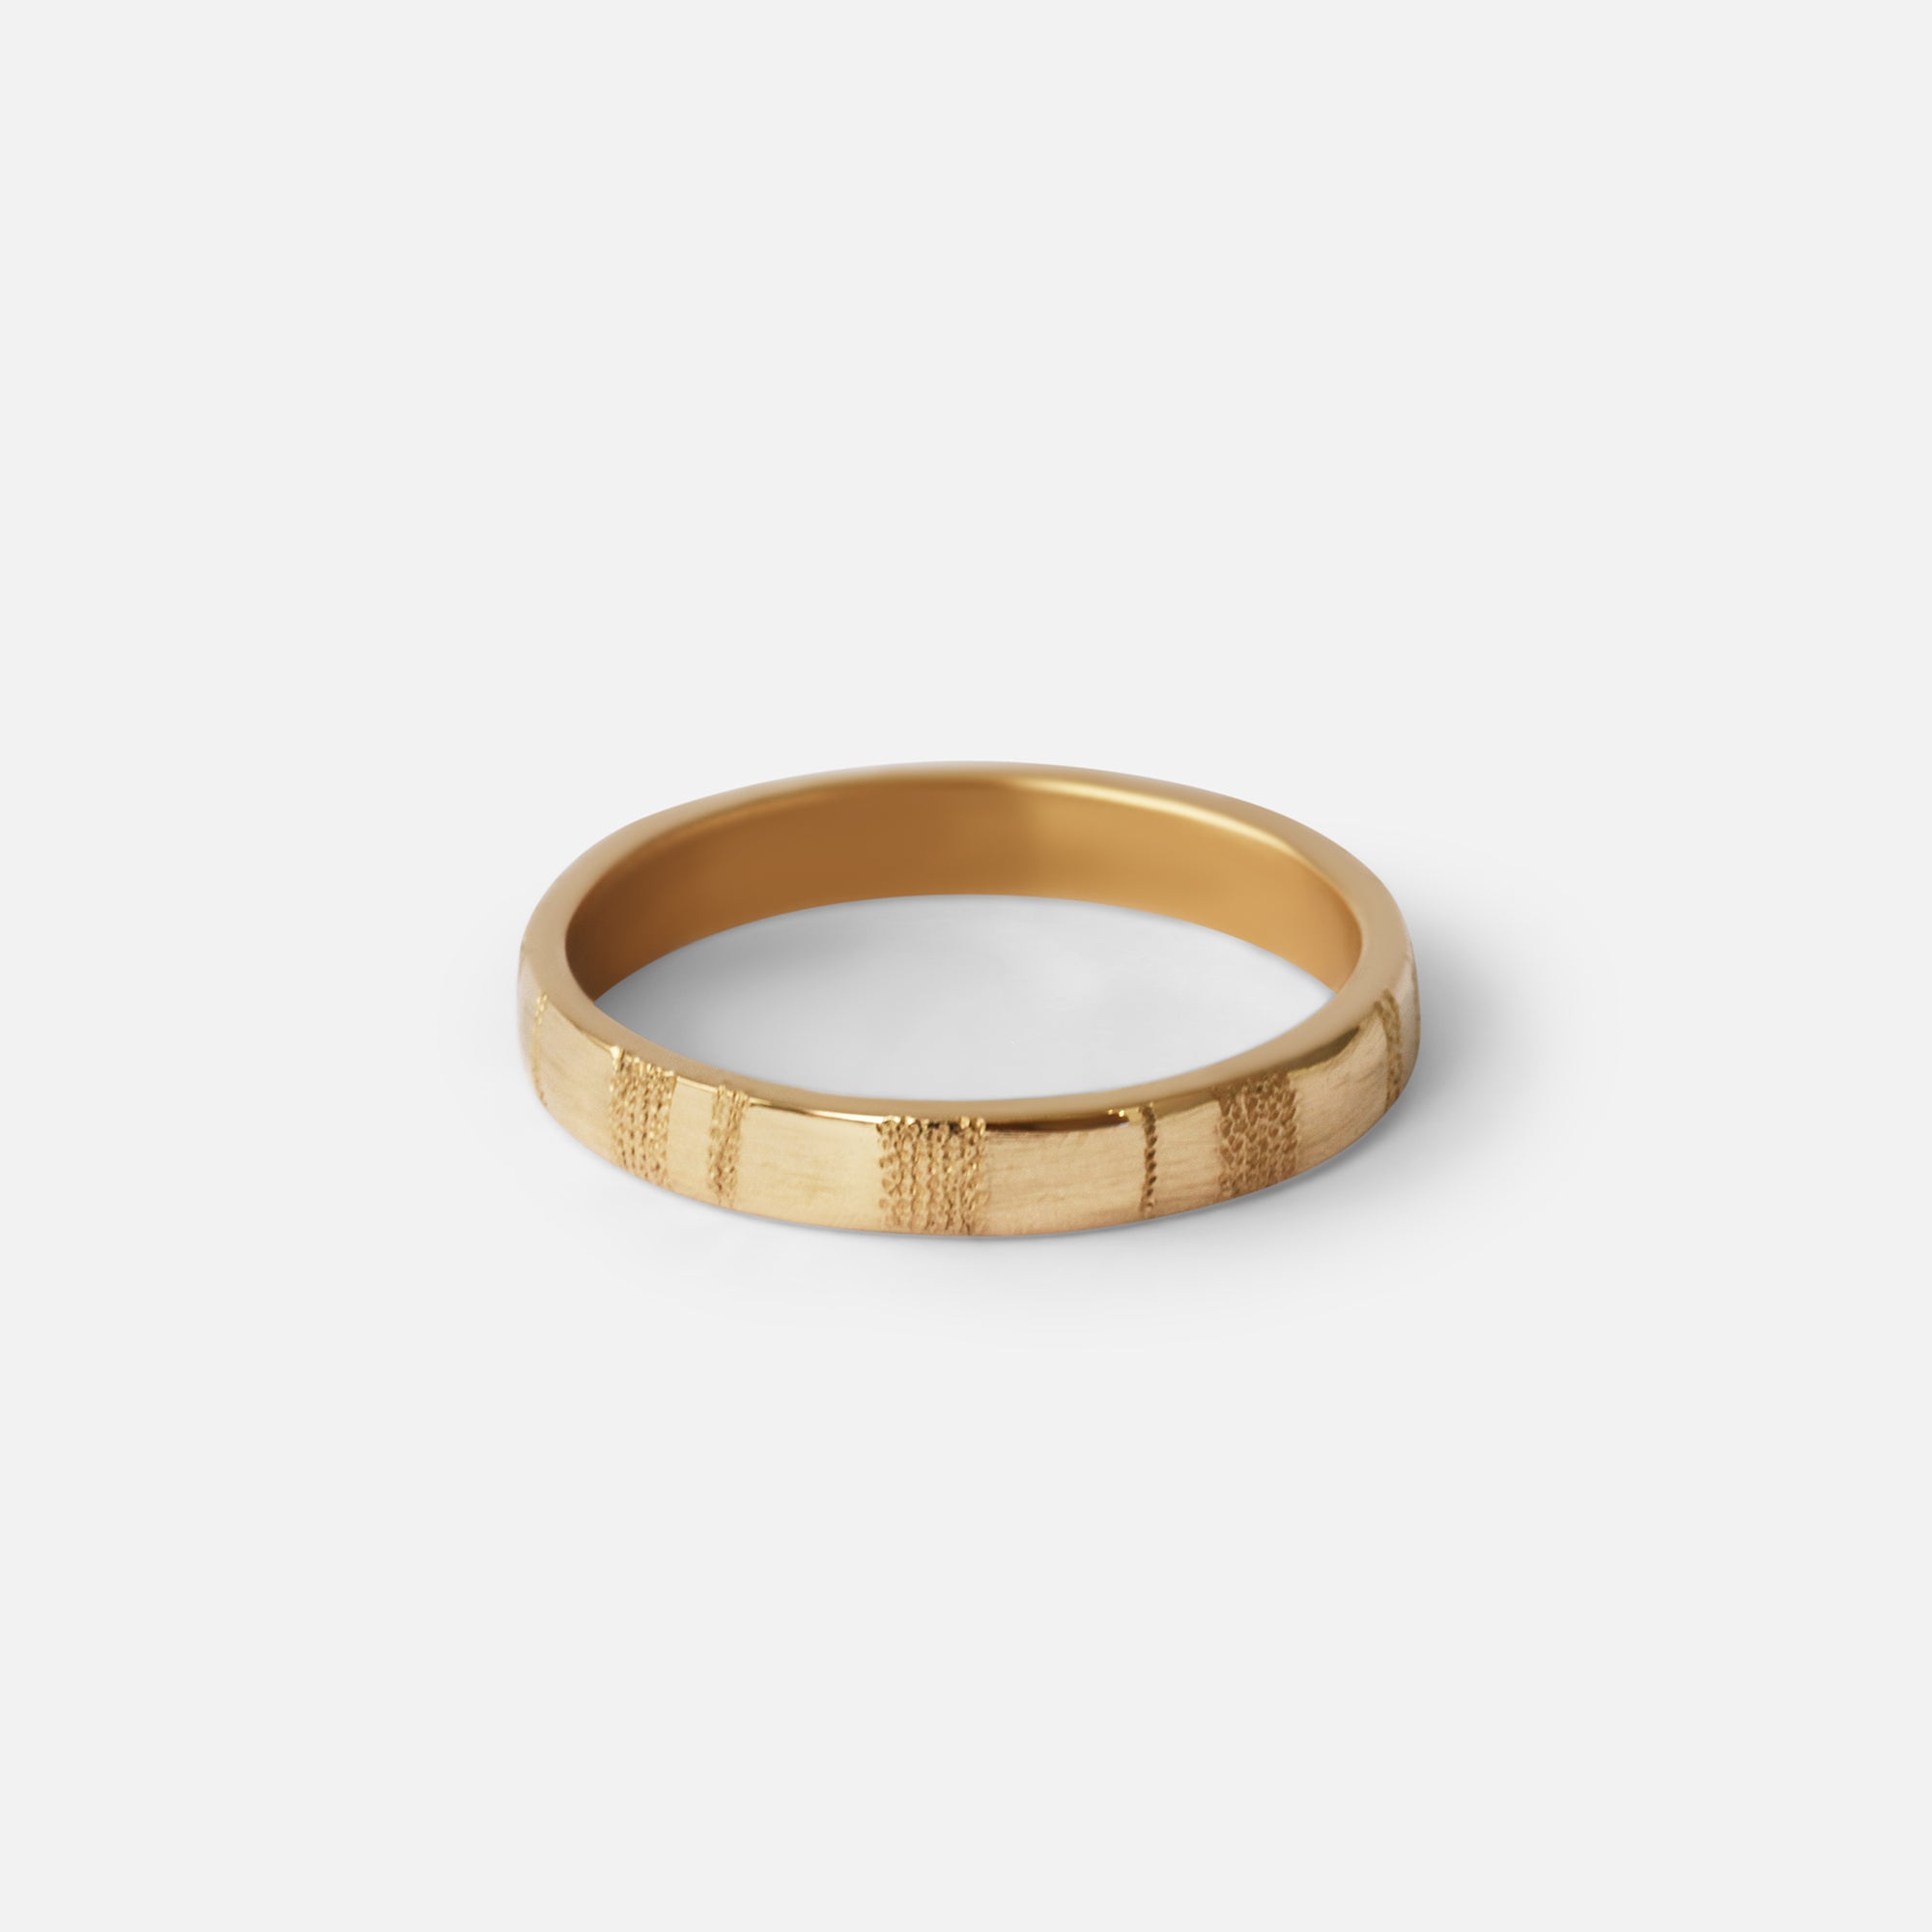 Stippled Stripe Band By Young Sun Song in rings Category